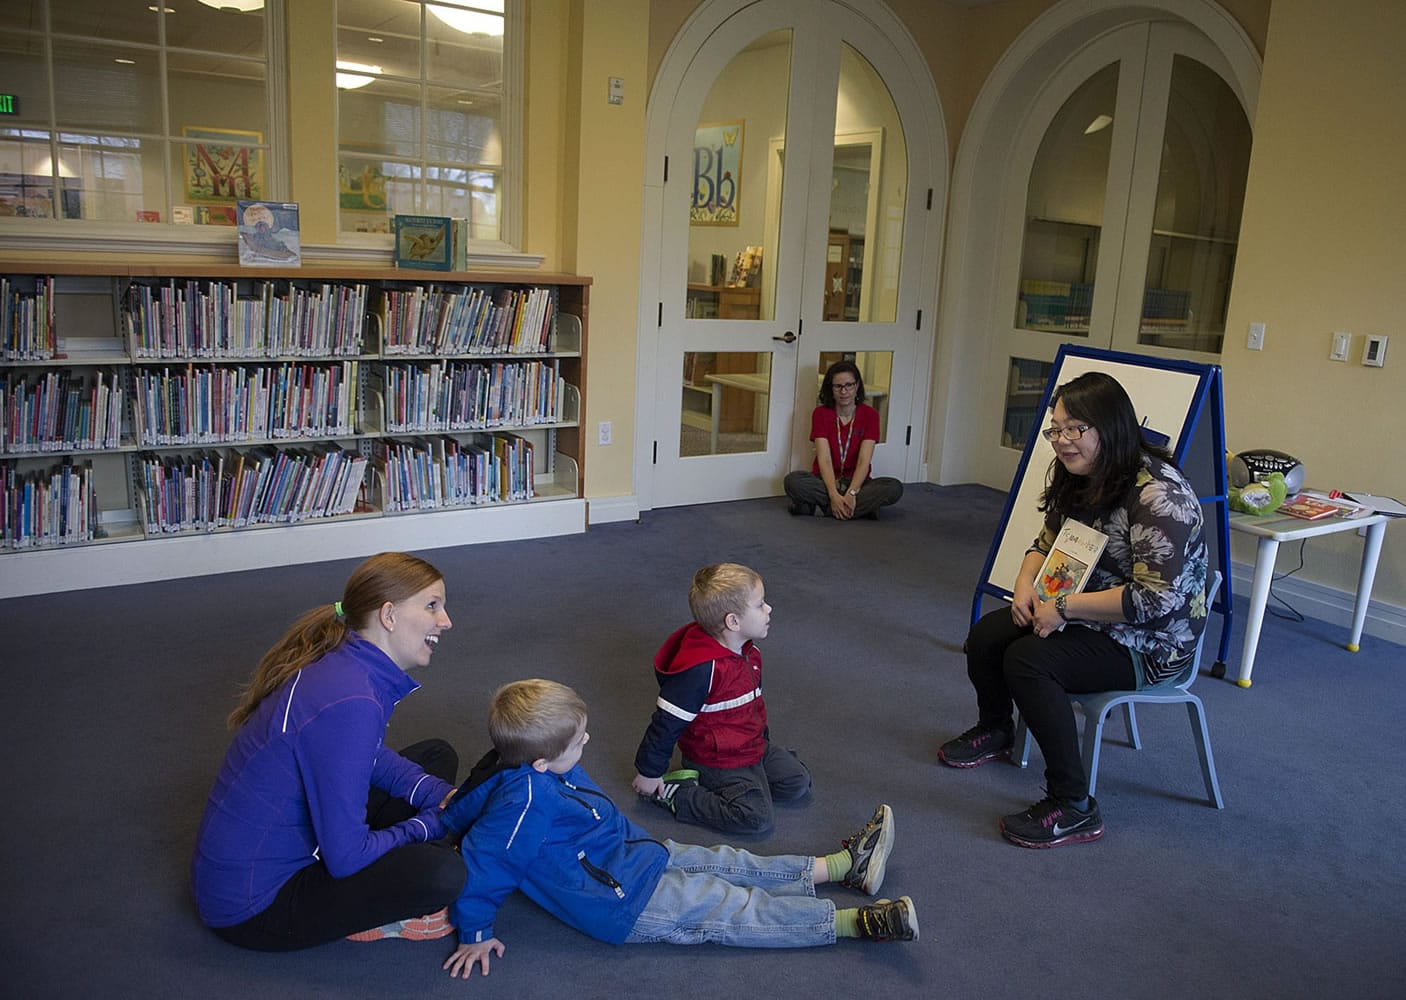 Ondalynn Vance, from left, of Vancouver enjoys Chinese Storytime with her sons, Isaac, 5, and Paxton, 3, as volunteer Amber Huang reads a book at the Camas Public Library. City officials are deciding whether the library should remain independent from the Fort Vancouver Regional Library District.